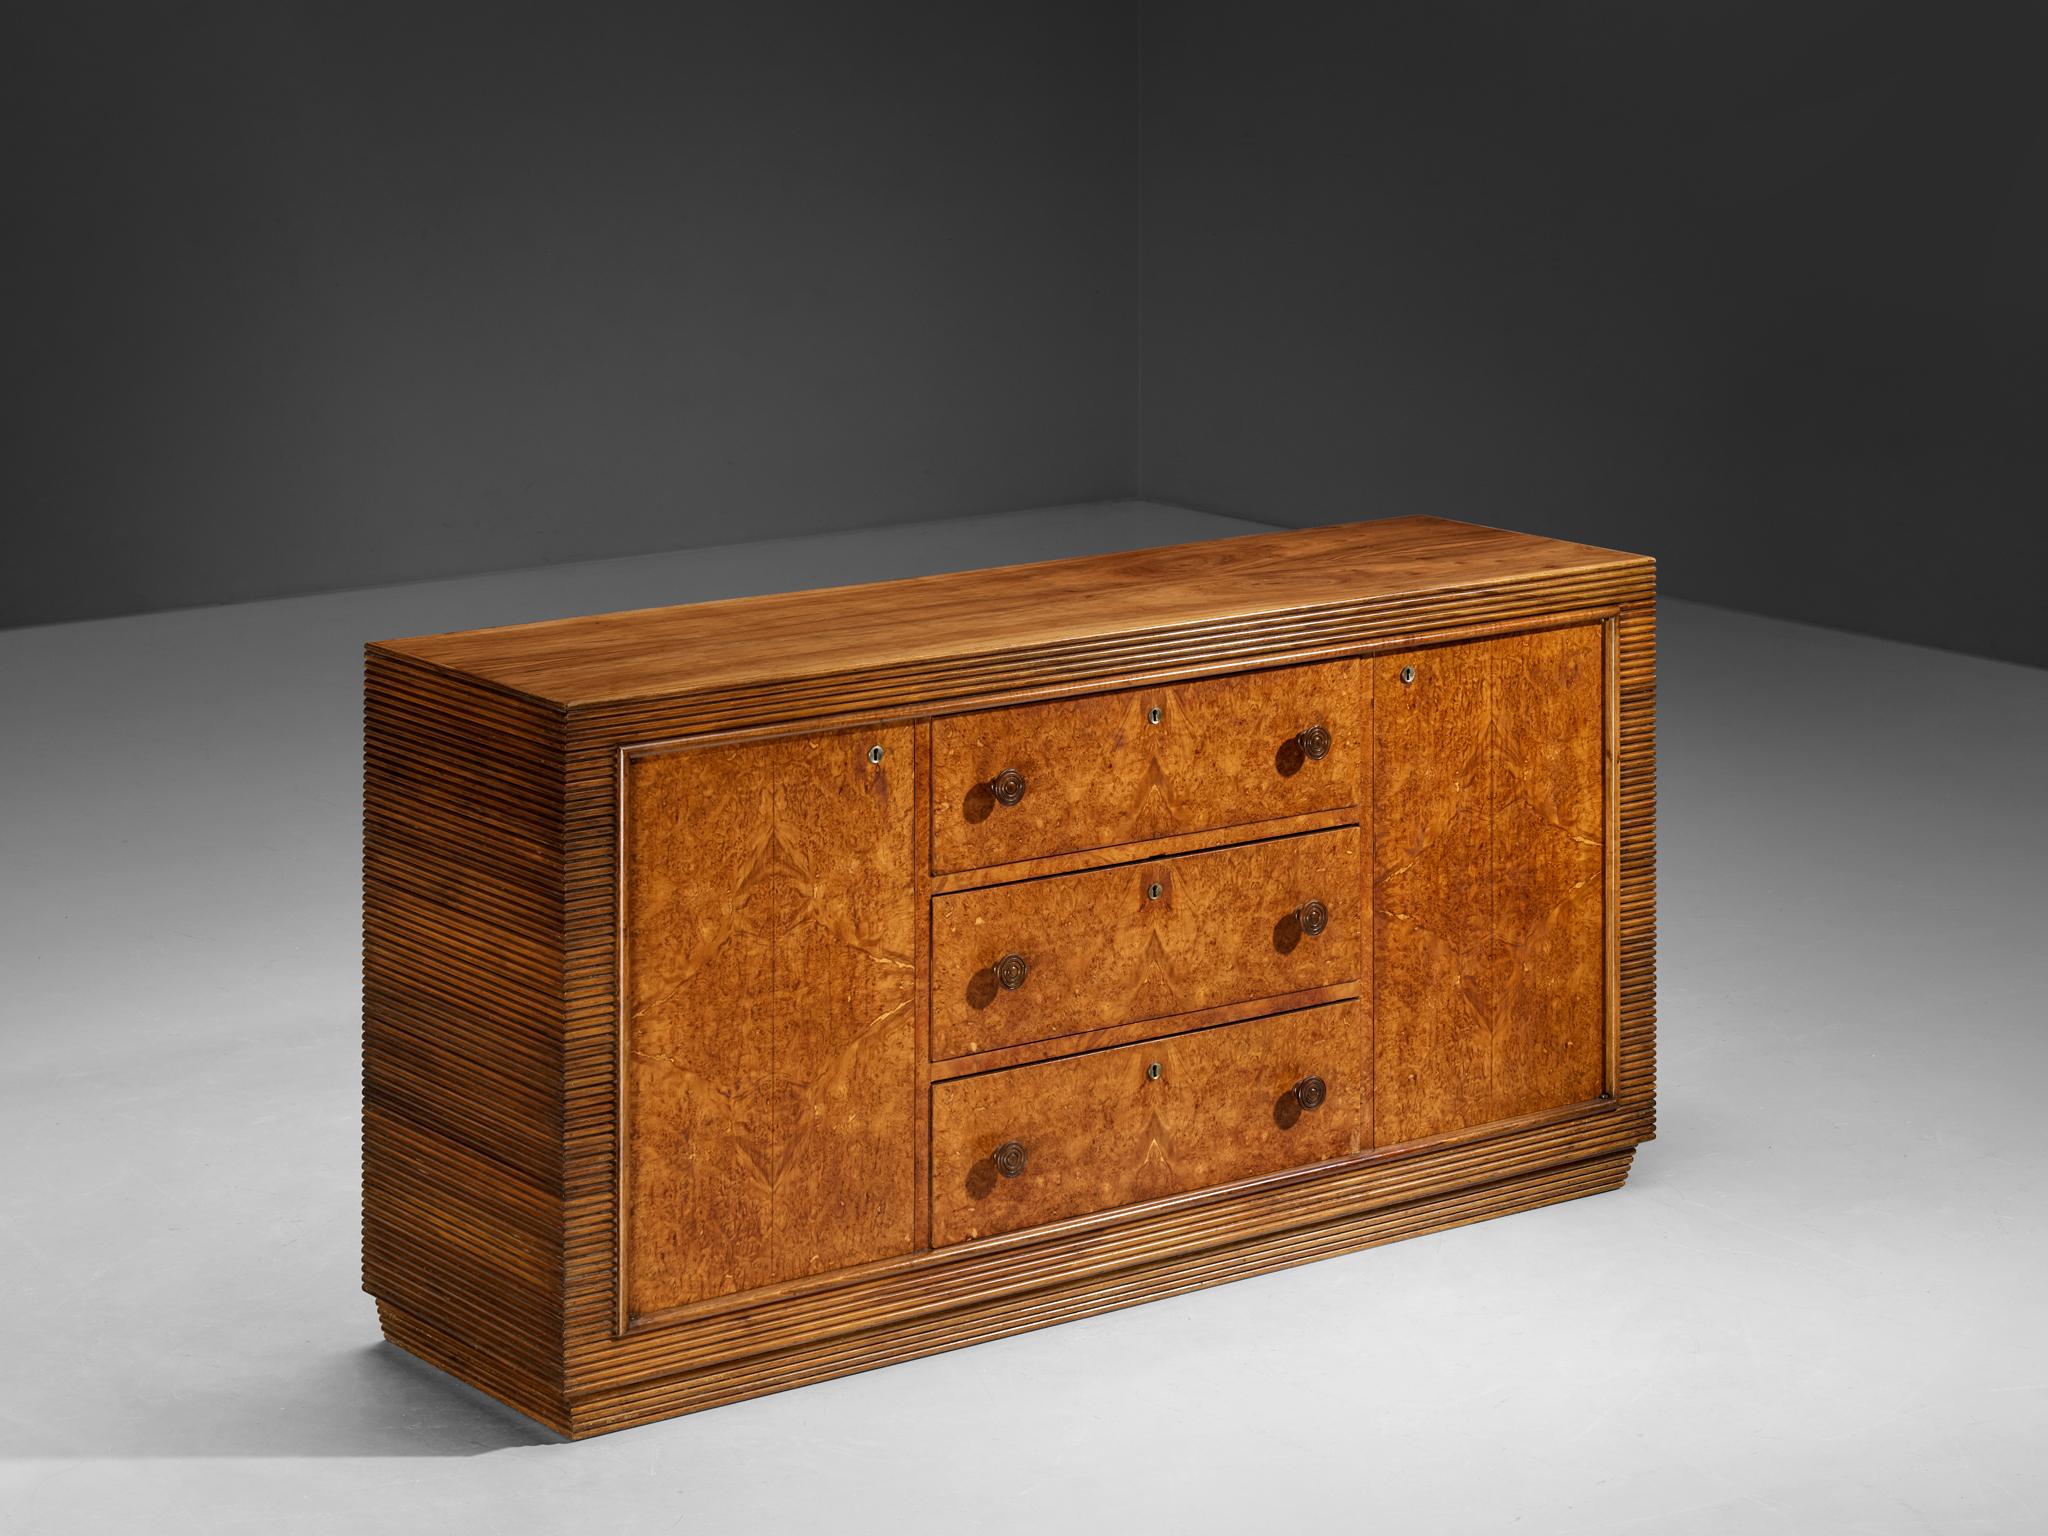 Sideboard, walnut, walnut burl, Italy, 1940s

This sideboard, a true gem of Italian Art Deco design, brings a touch of elegance and beauty to one's interior space. The cabinet features exquisite details, such as the grissinato carvings: delicate